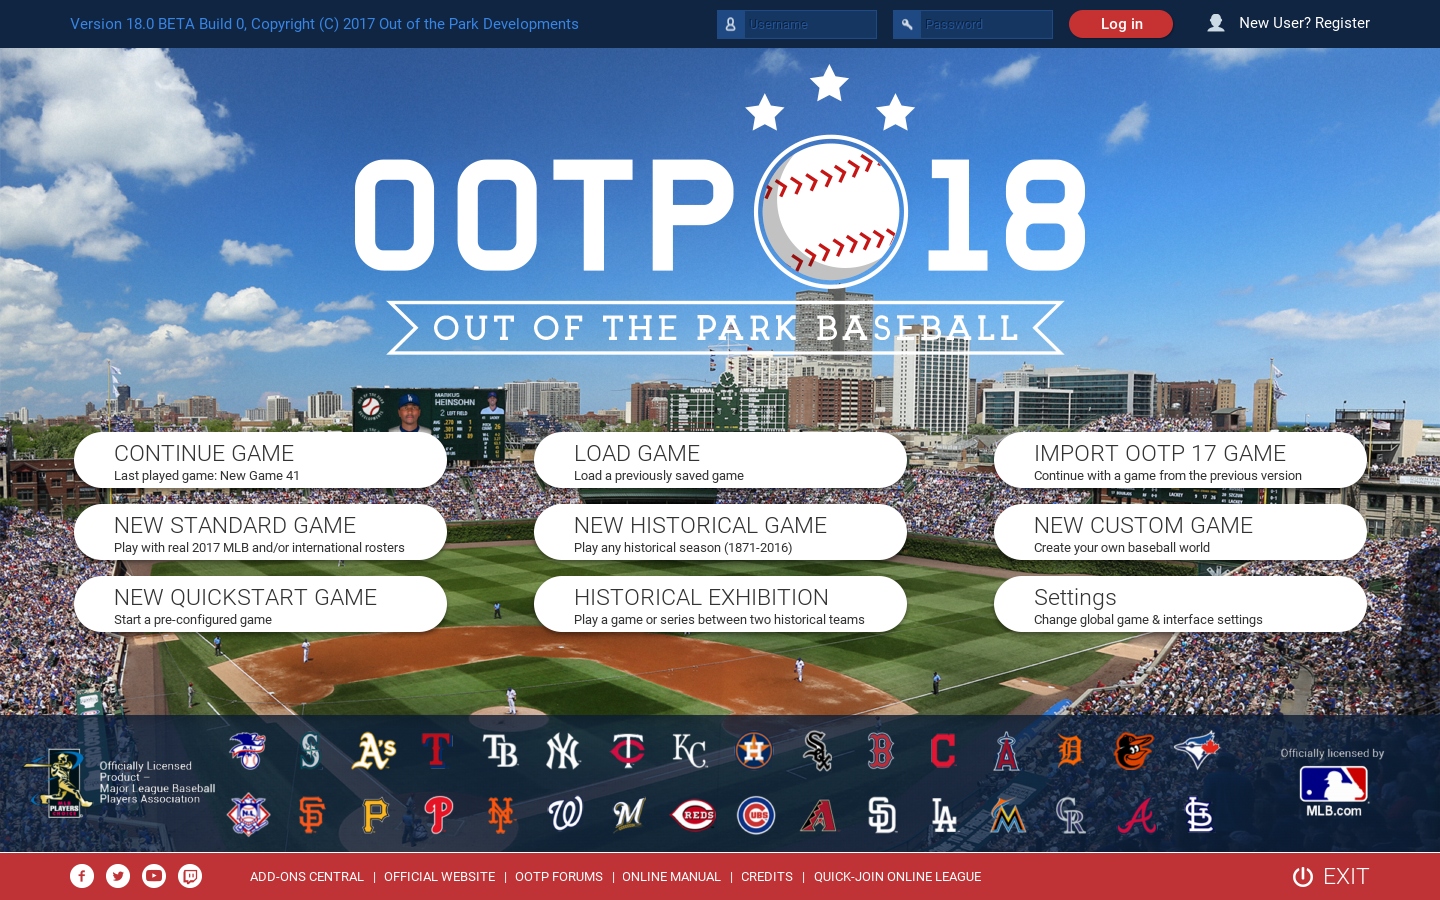 10% discount and beta access for OOTP 18 pre-orders! Challenge mode, 3D highlight reels, Negro Leagues and more!